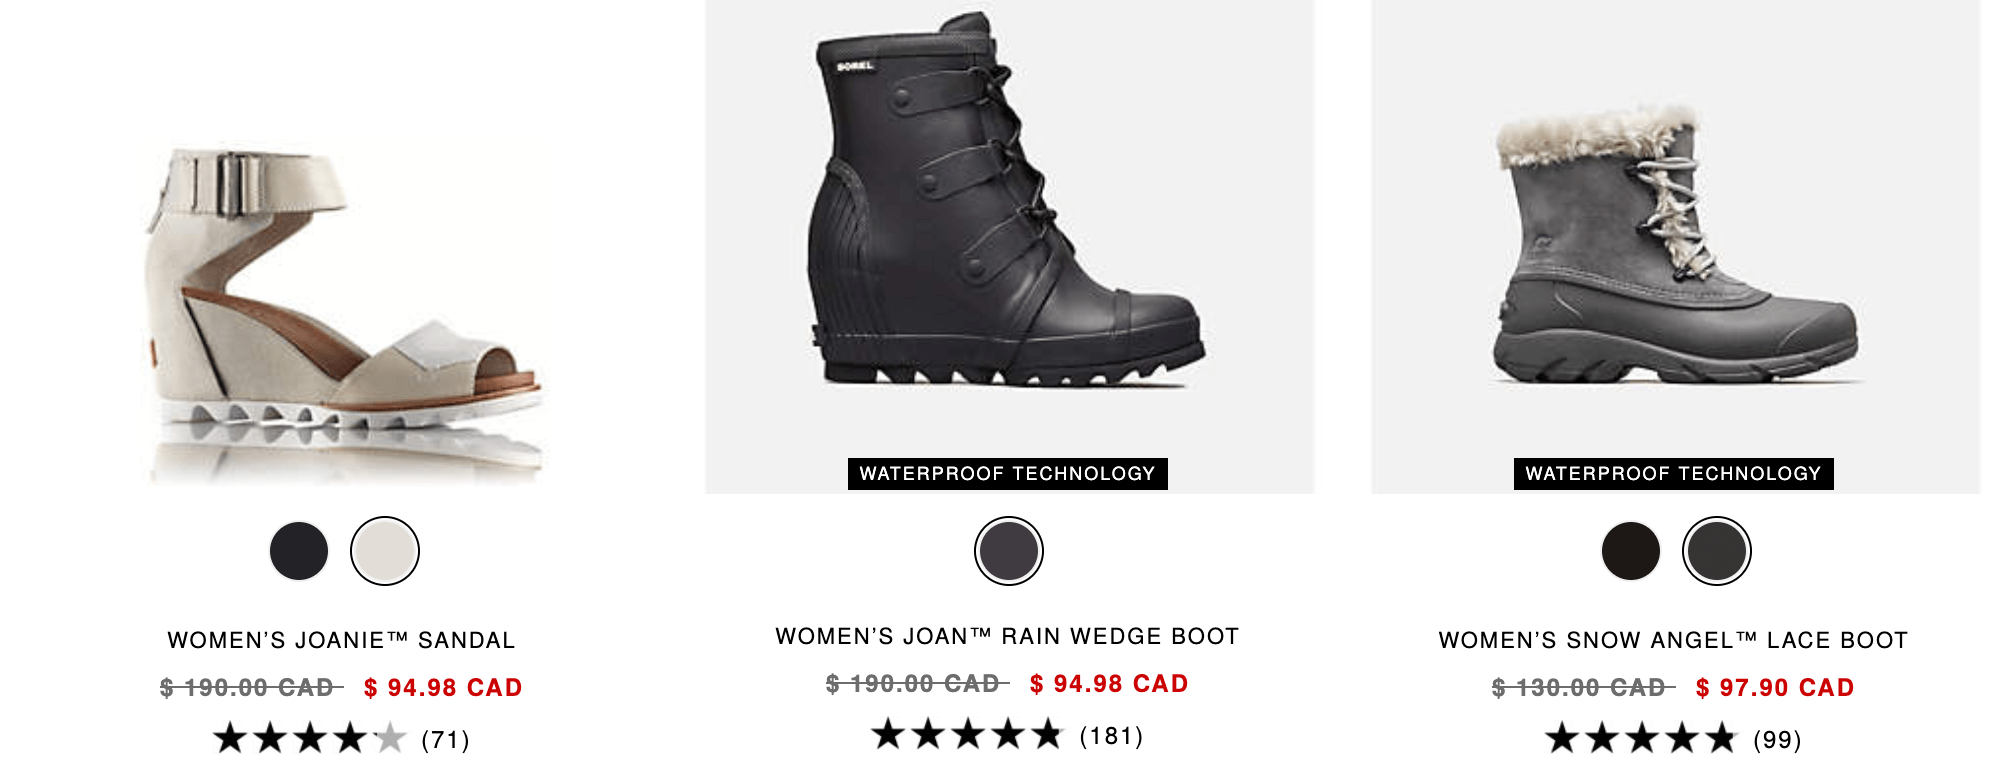 Sorel Canada Sale: Save Up to 50% Off Many Styles - Canadian Freebies ...